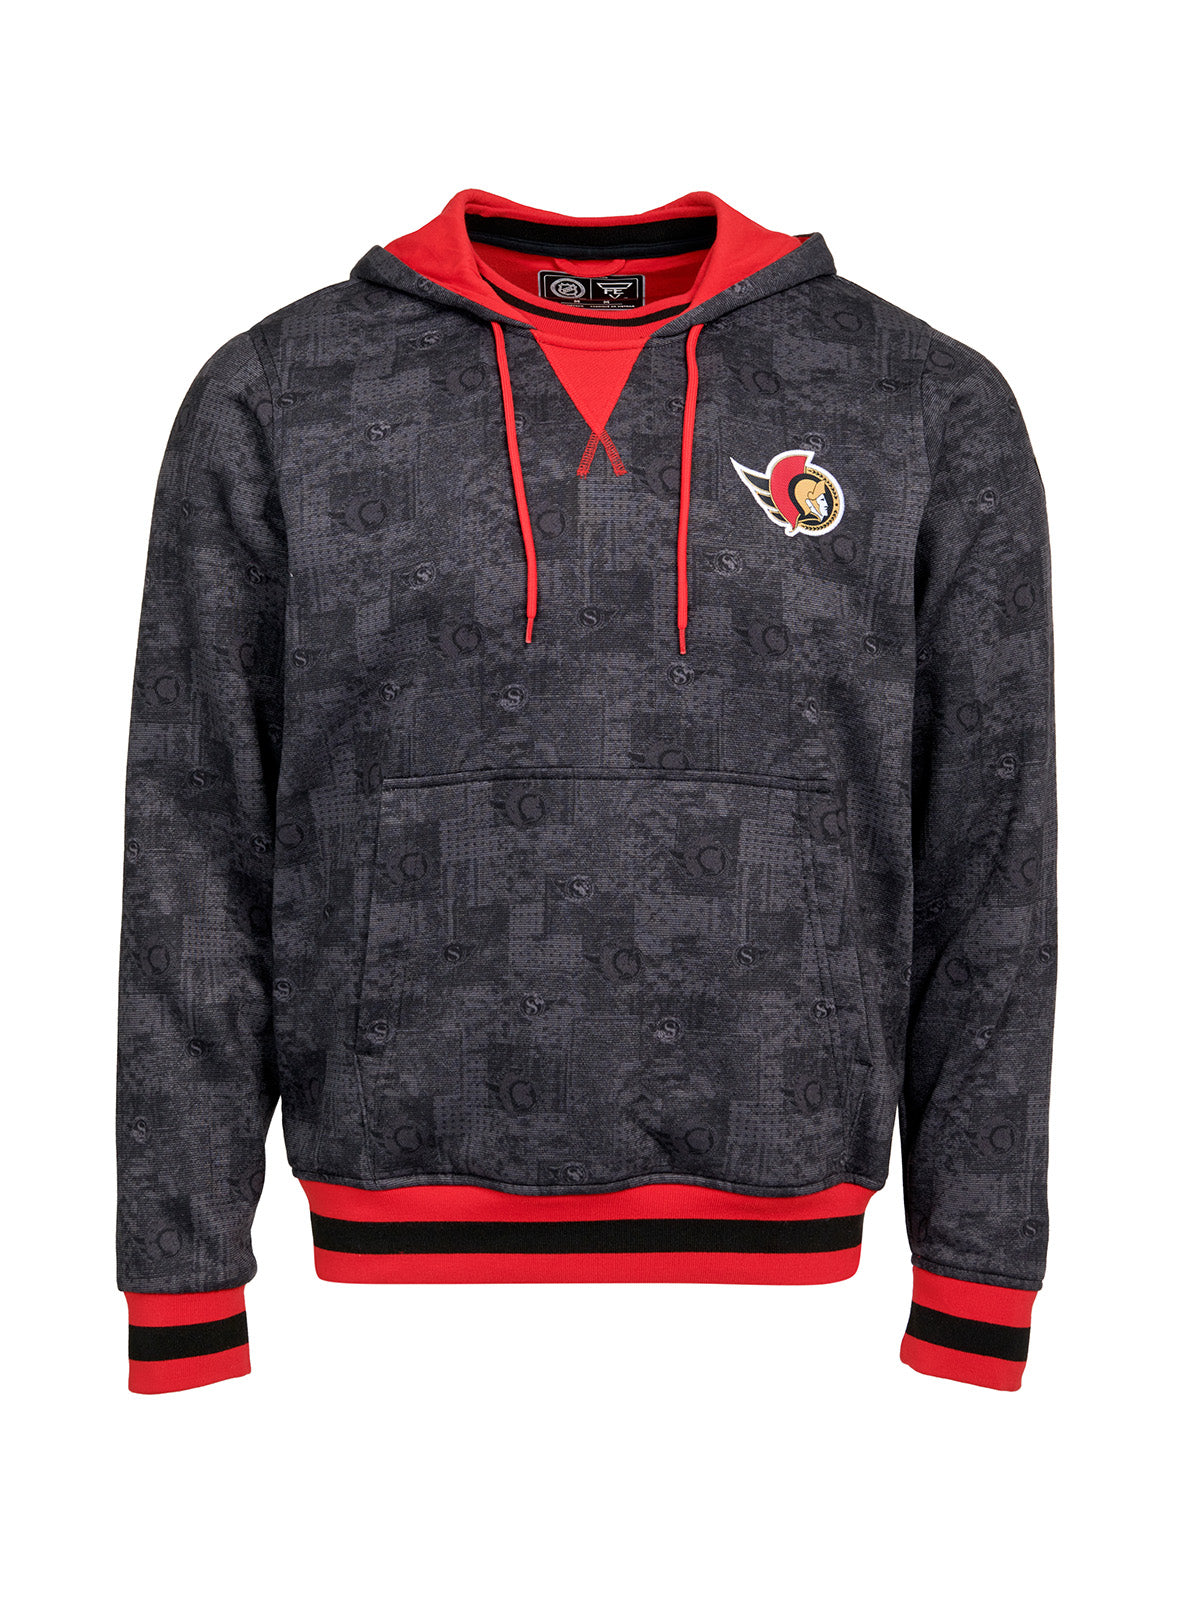 Ottawa Senators Hoodie - Show your team spirit, with the iconic team logo patch on the front left chest, and proudly display your Ottawa Senators support in their team colors with this NHL hockey hoodie.